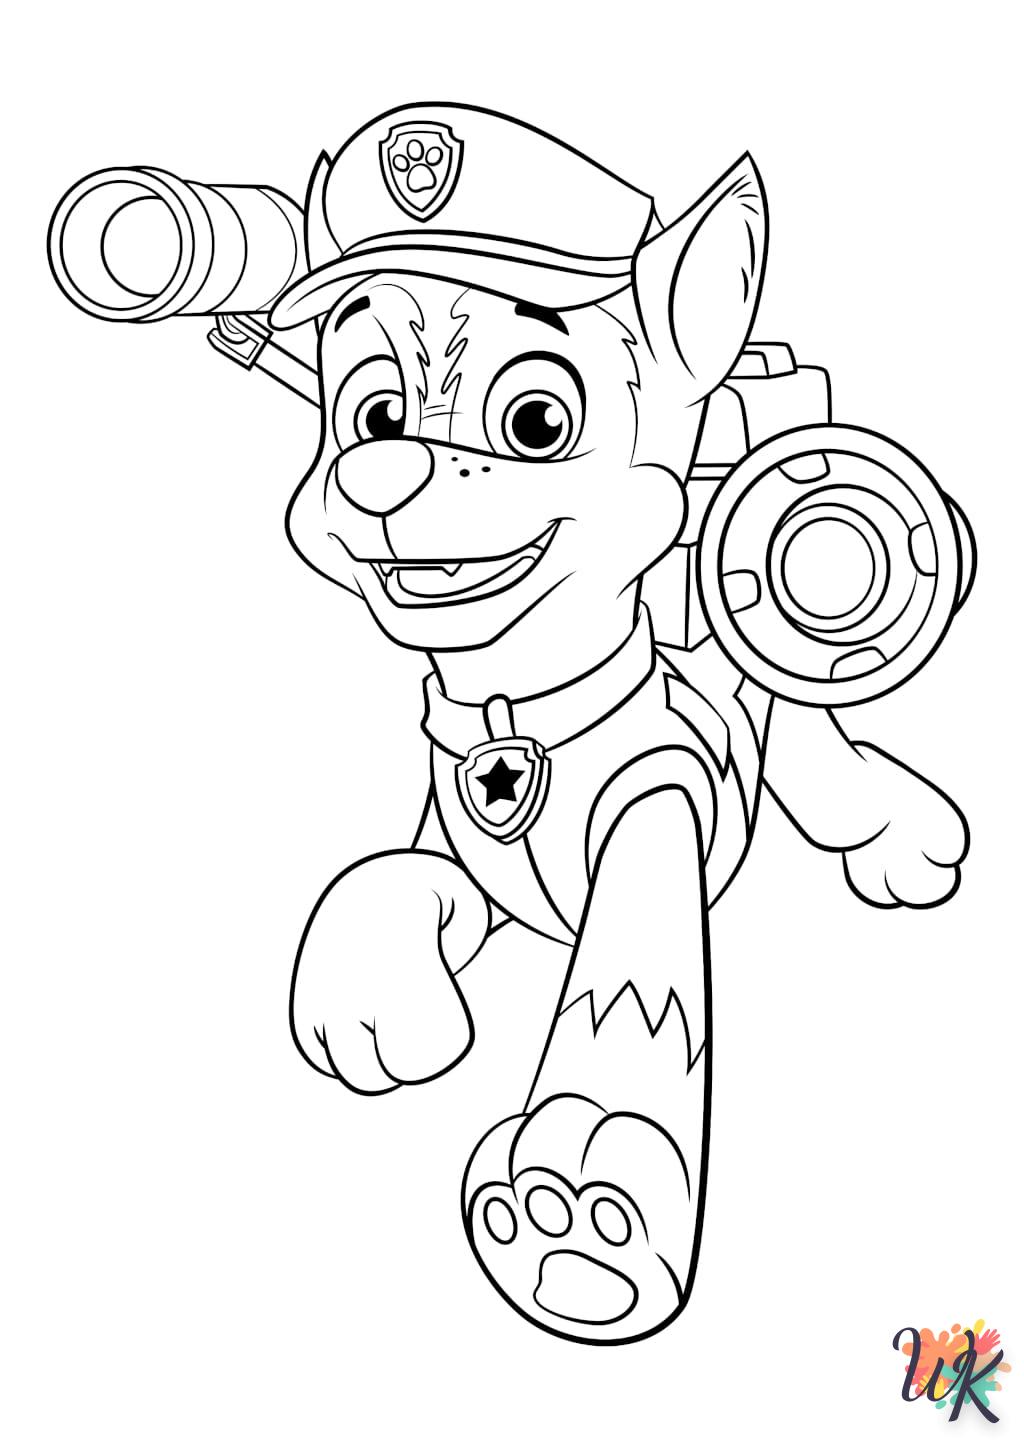 Paw Patrol coloring and drawing to print